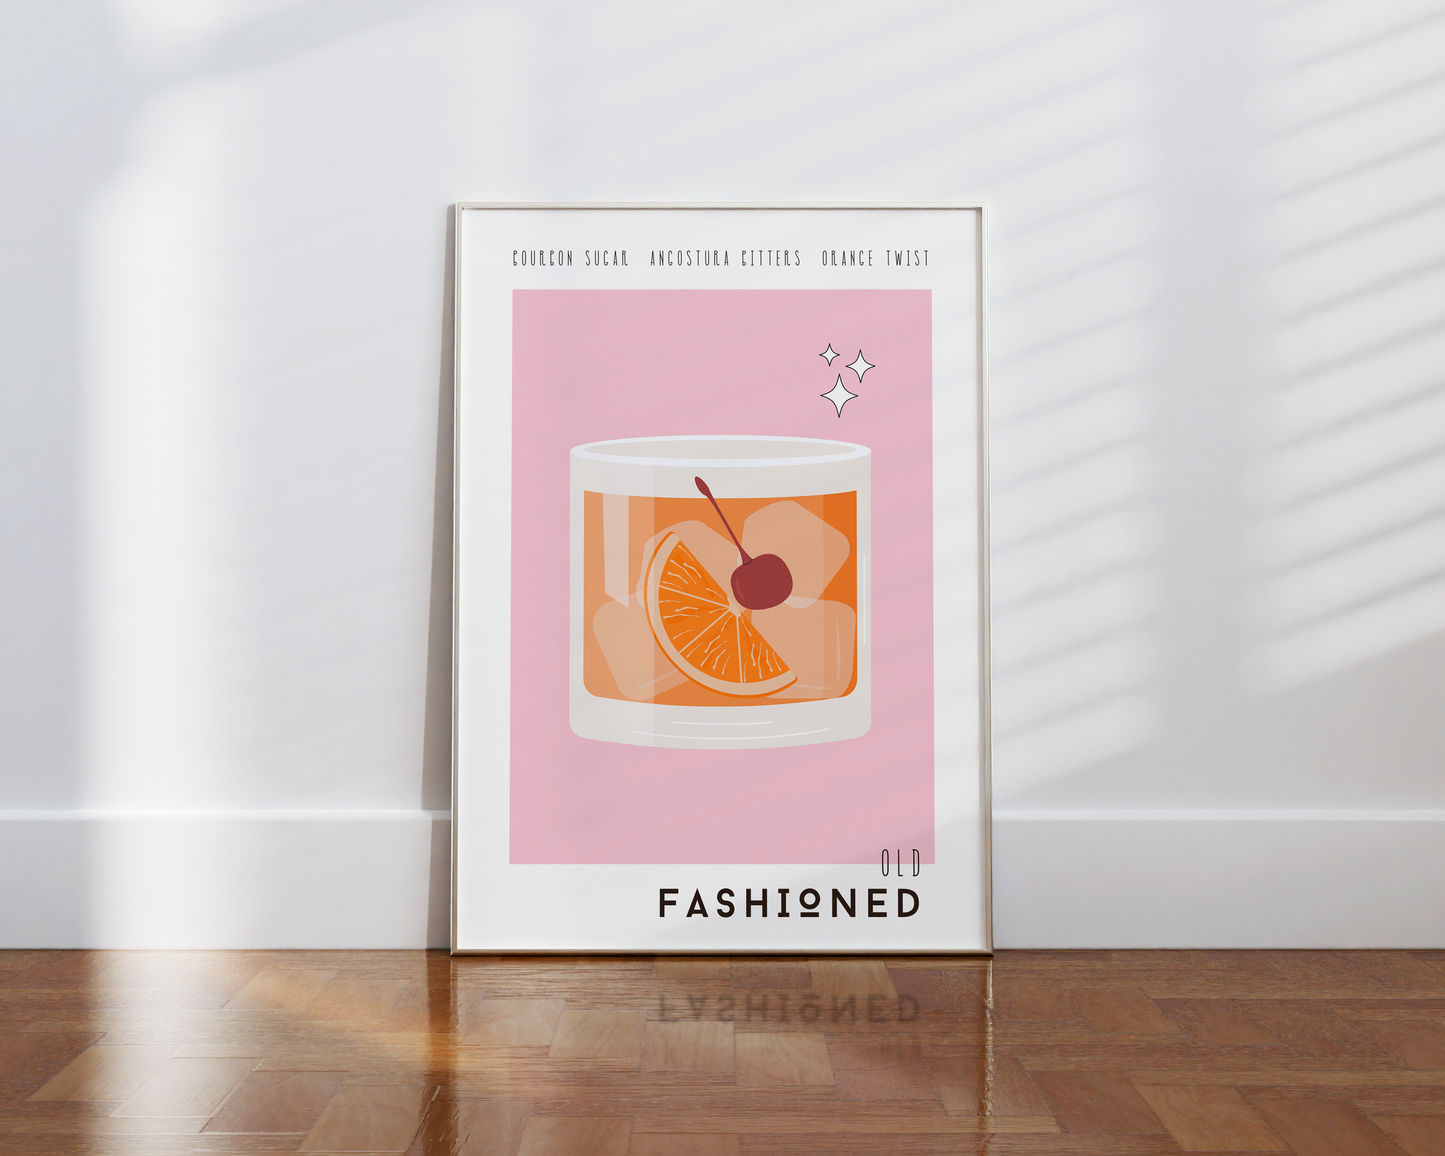 Old Fashioned Cocktail Poster